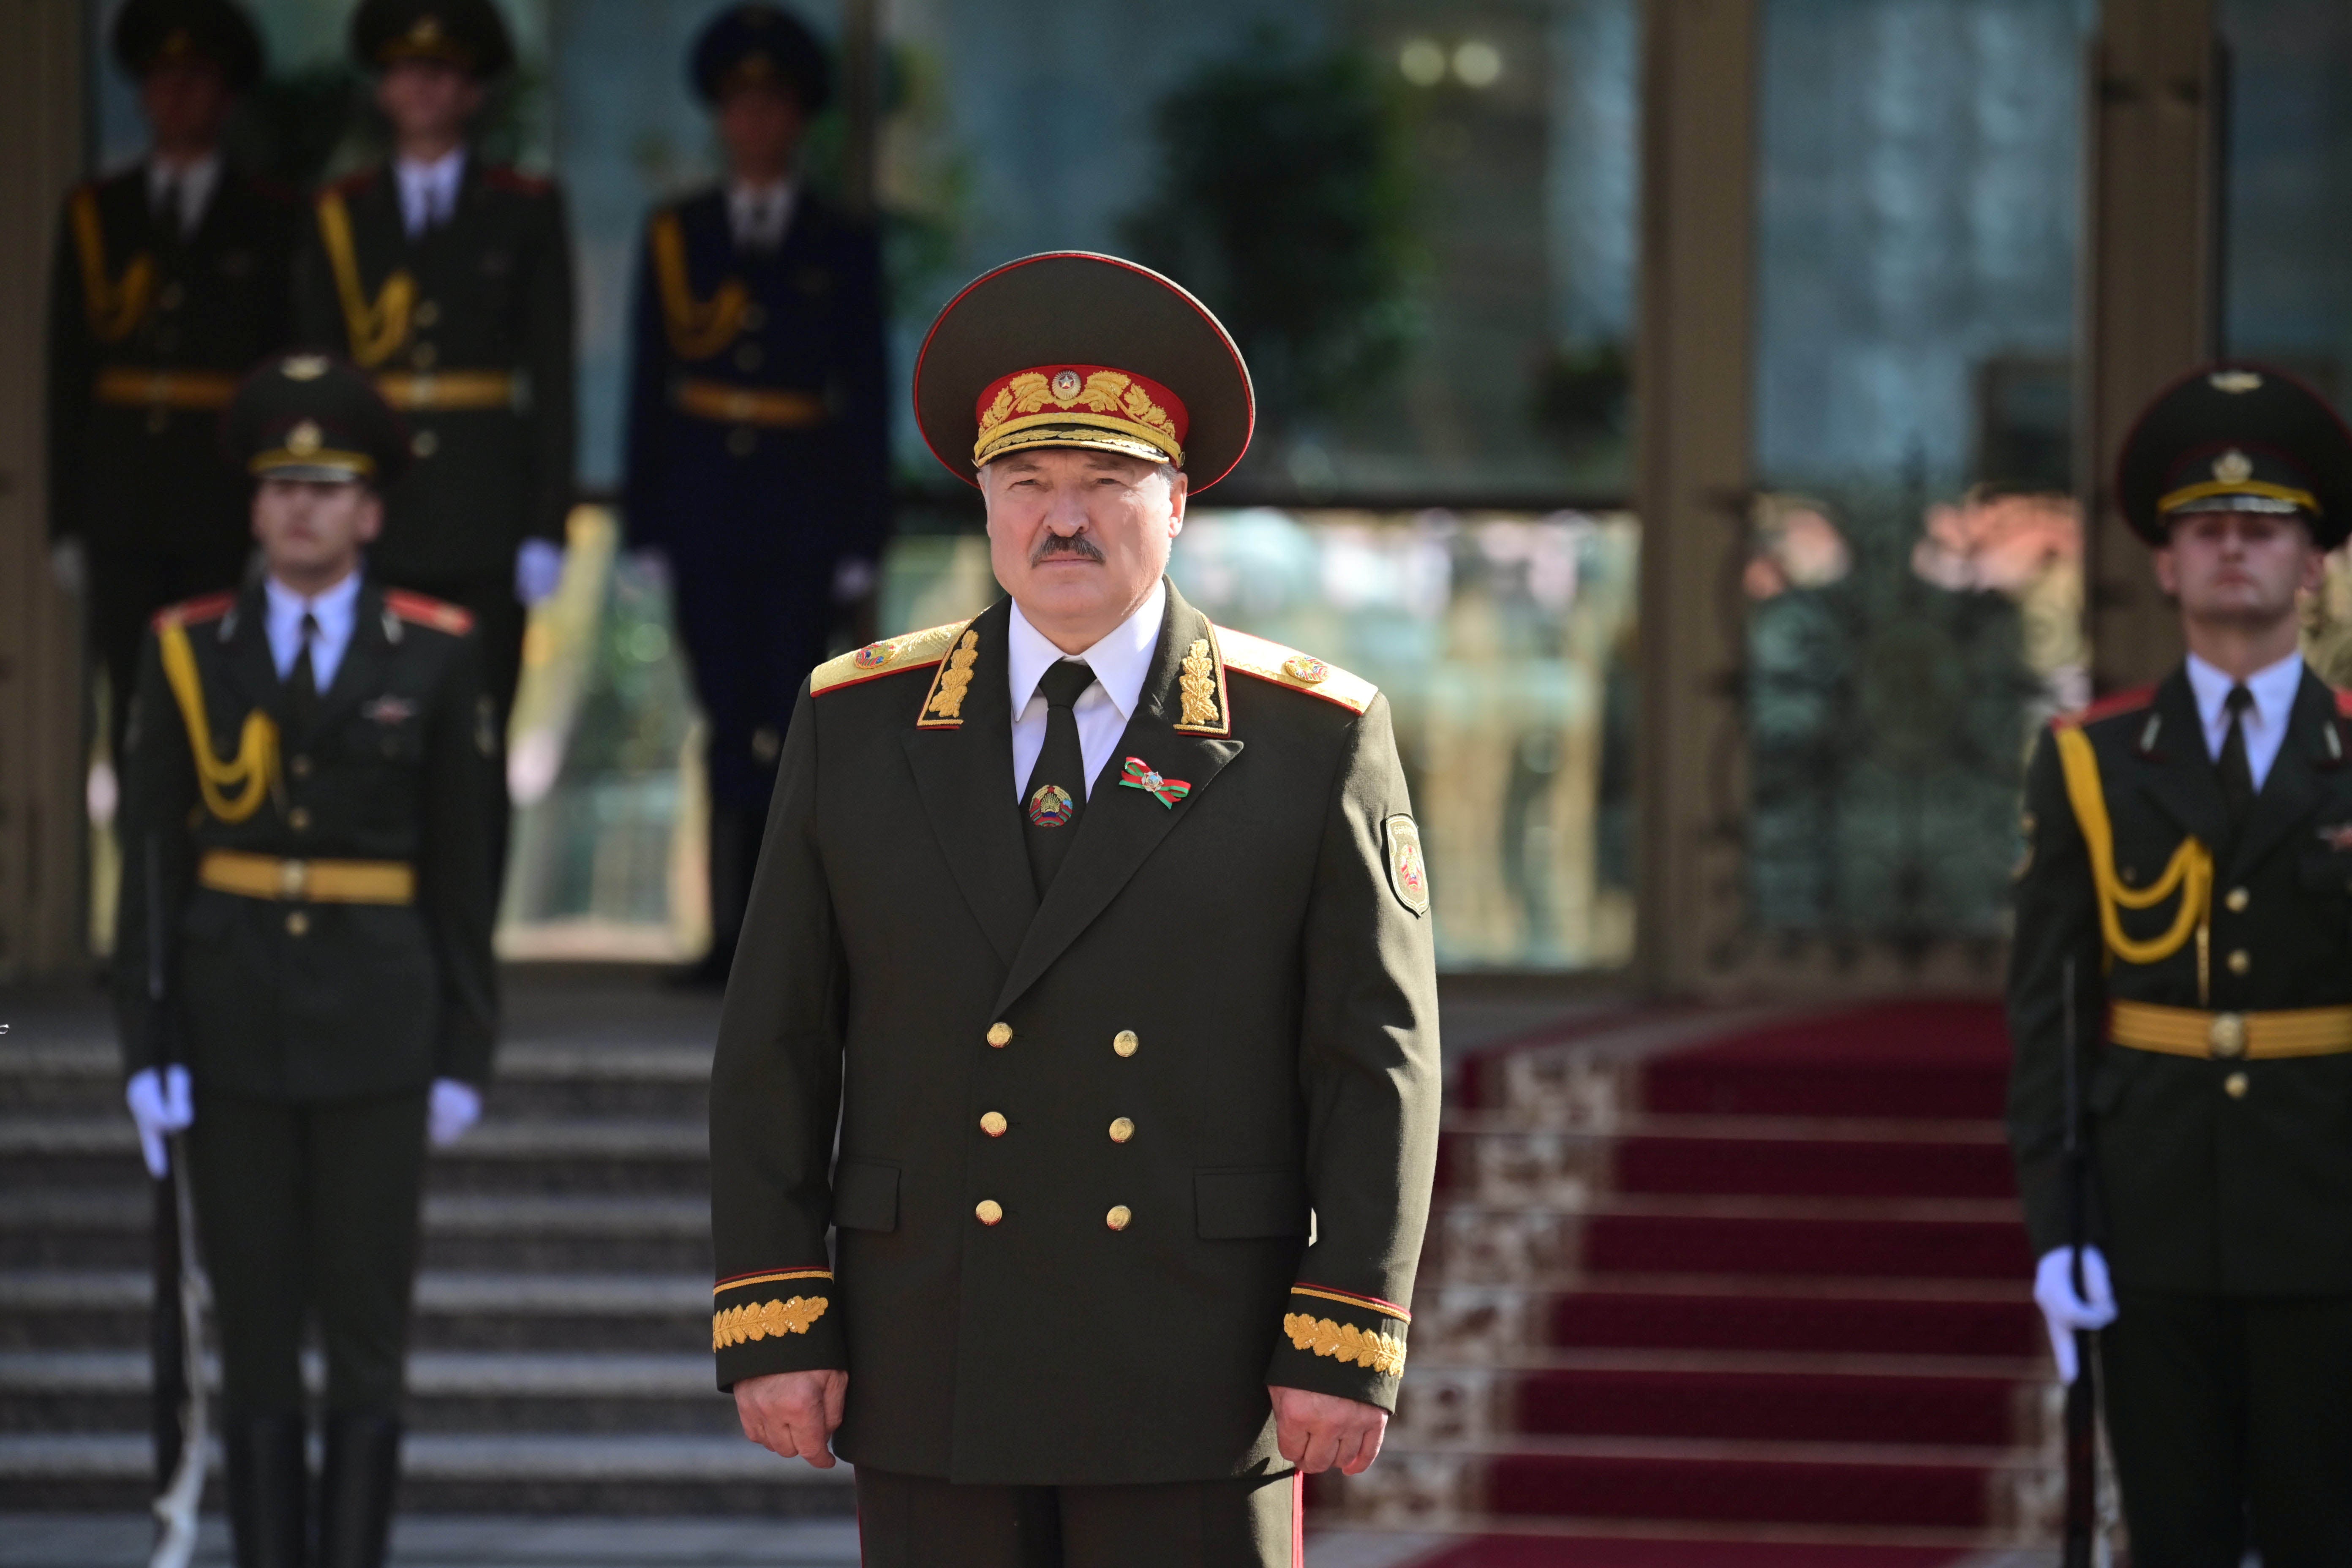 Belarusian president Alexander Lukashenko stands to attention at his inauguration ceremony in Minsk on Wednesday